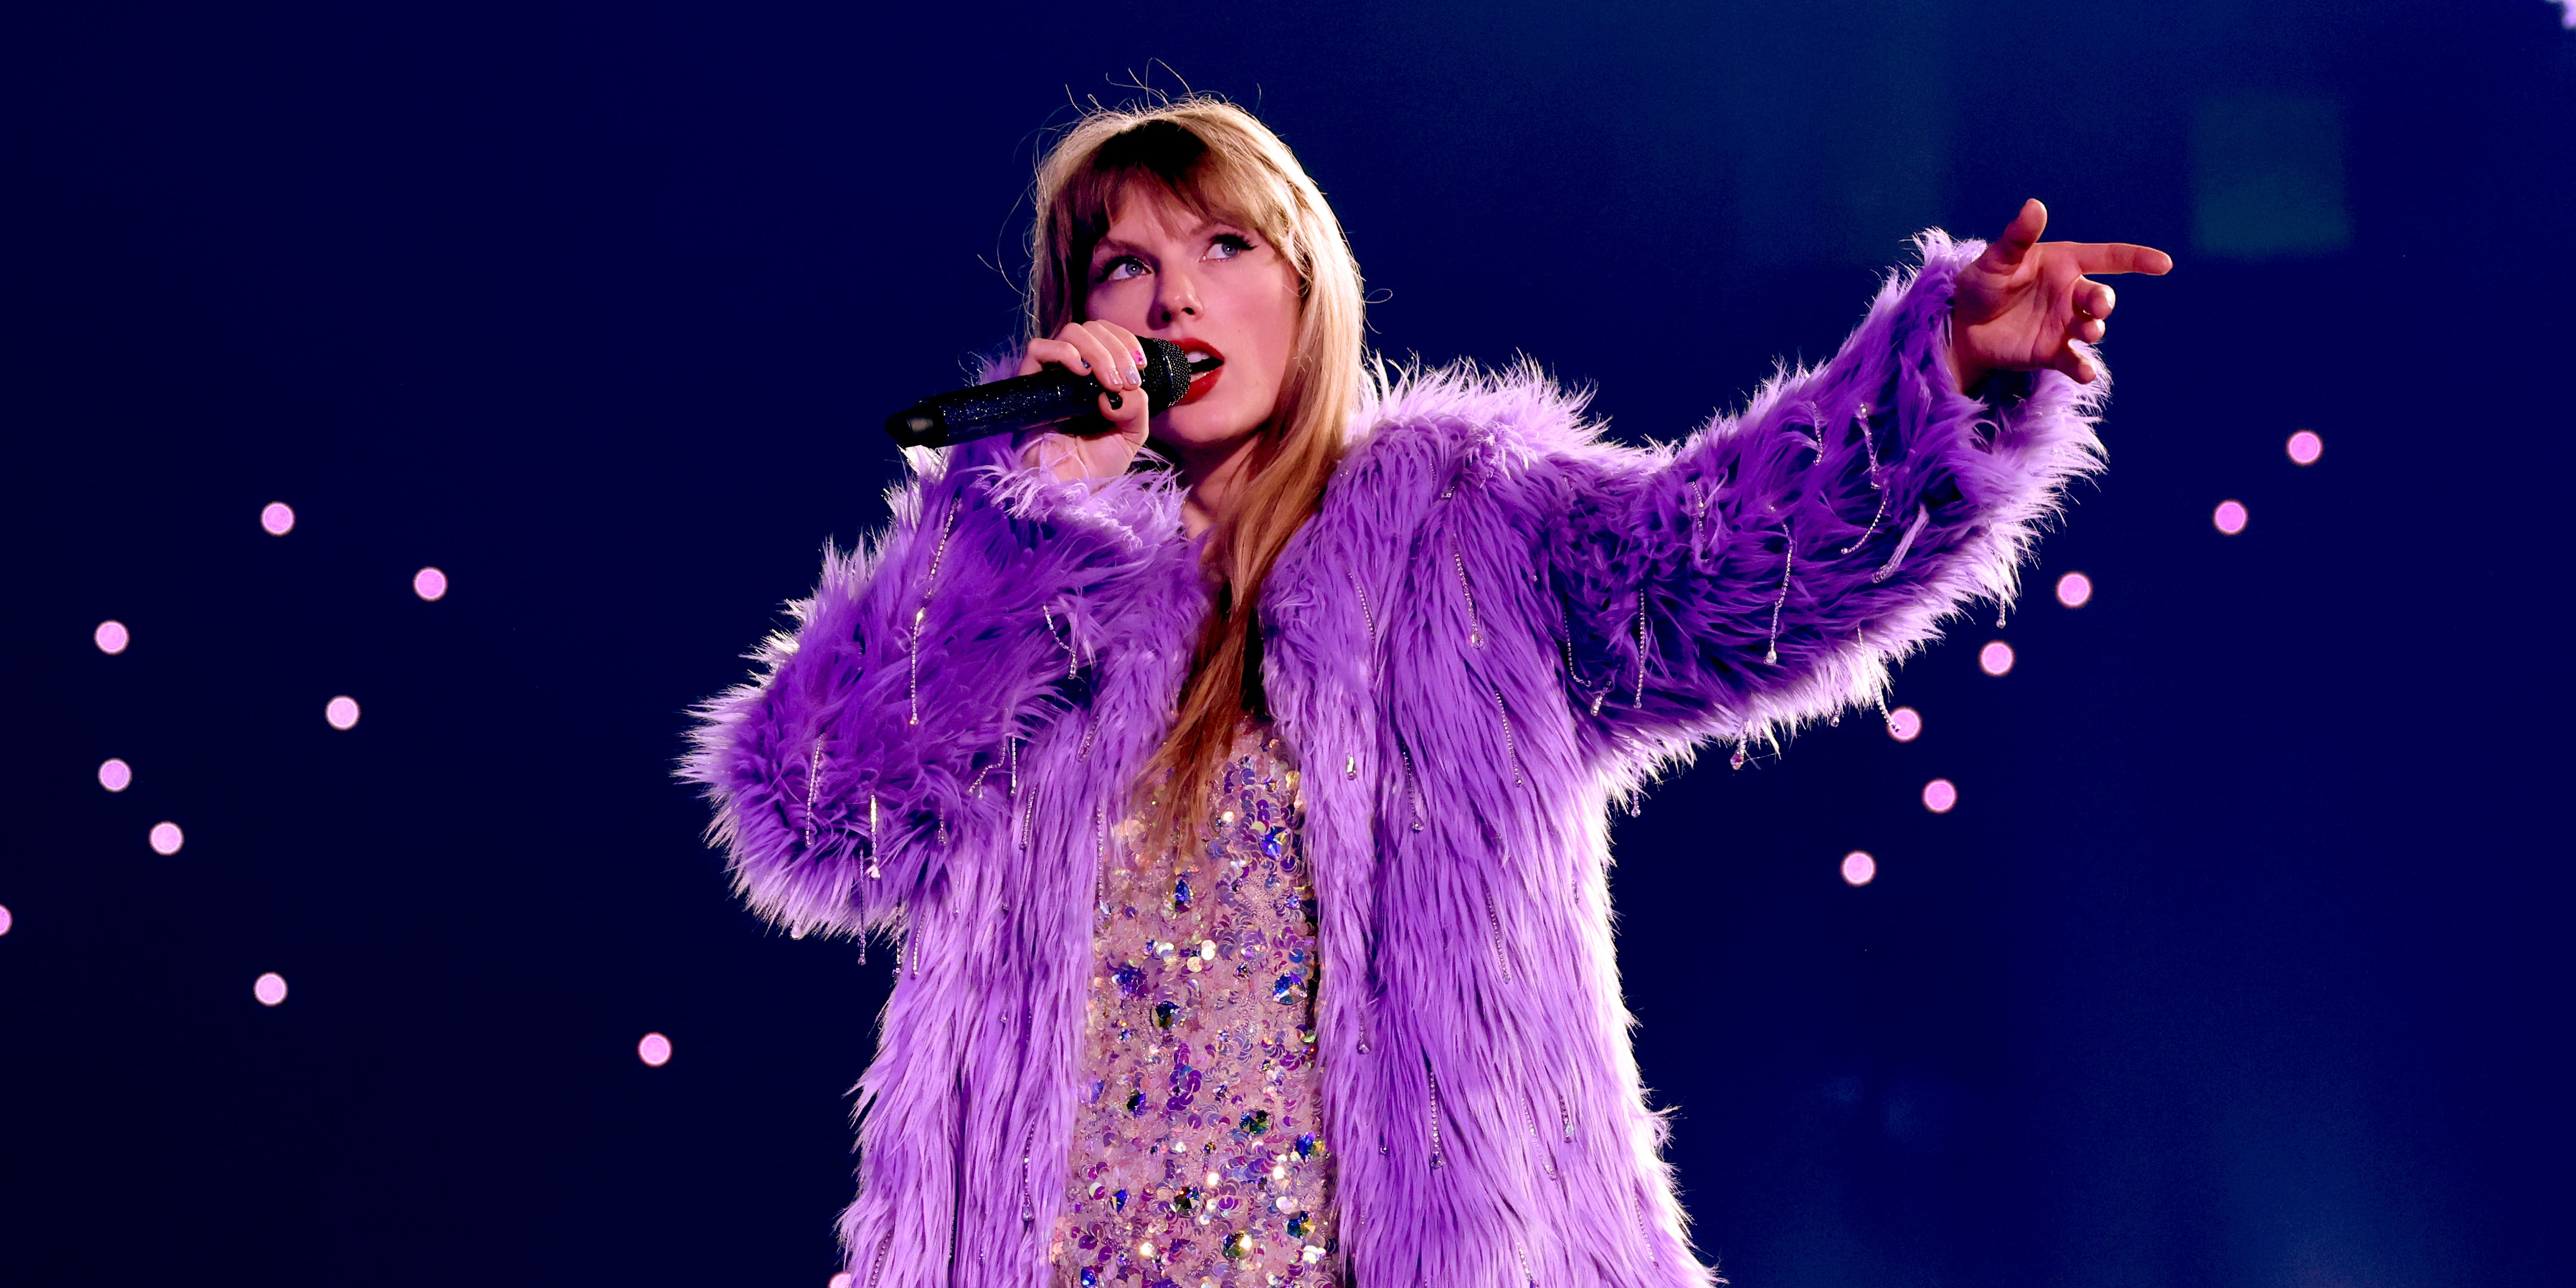 Taylor Swift Reputation Tour' Netflix Review: She Knows Her Audience All  Too Well